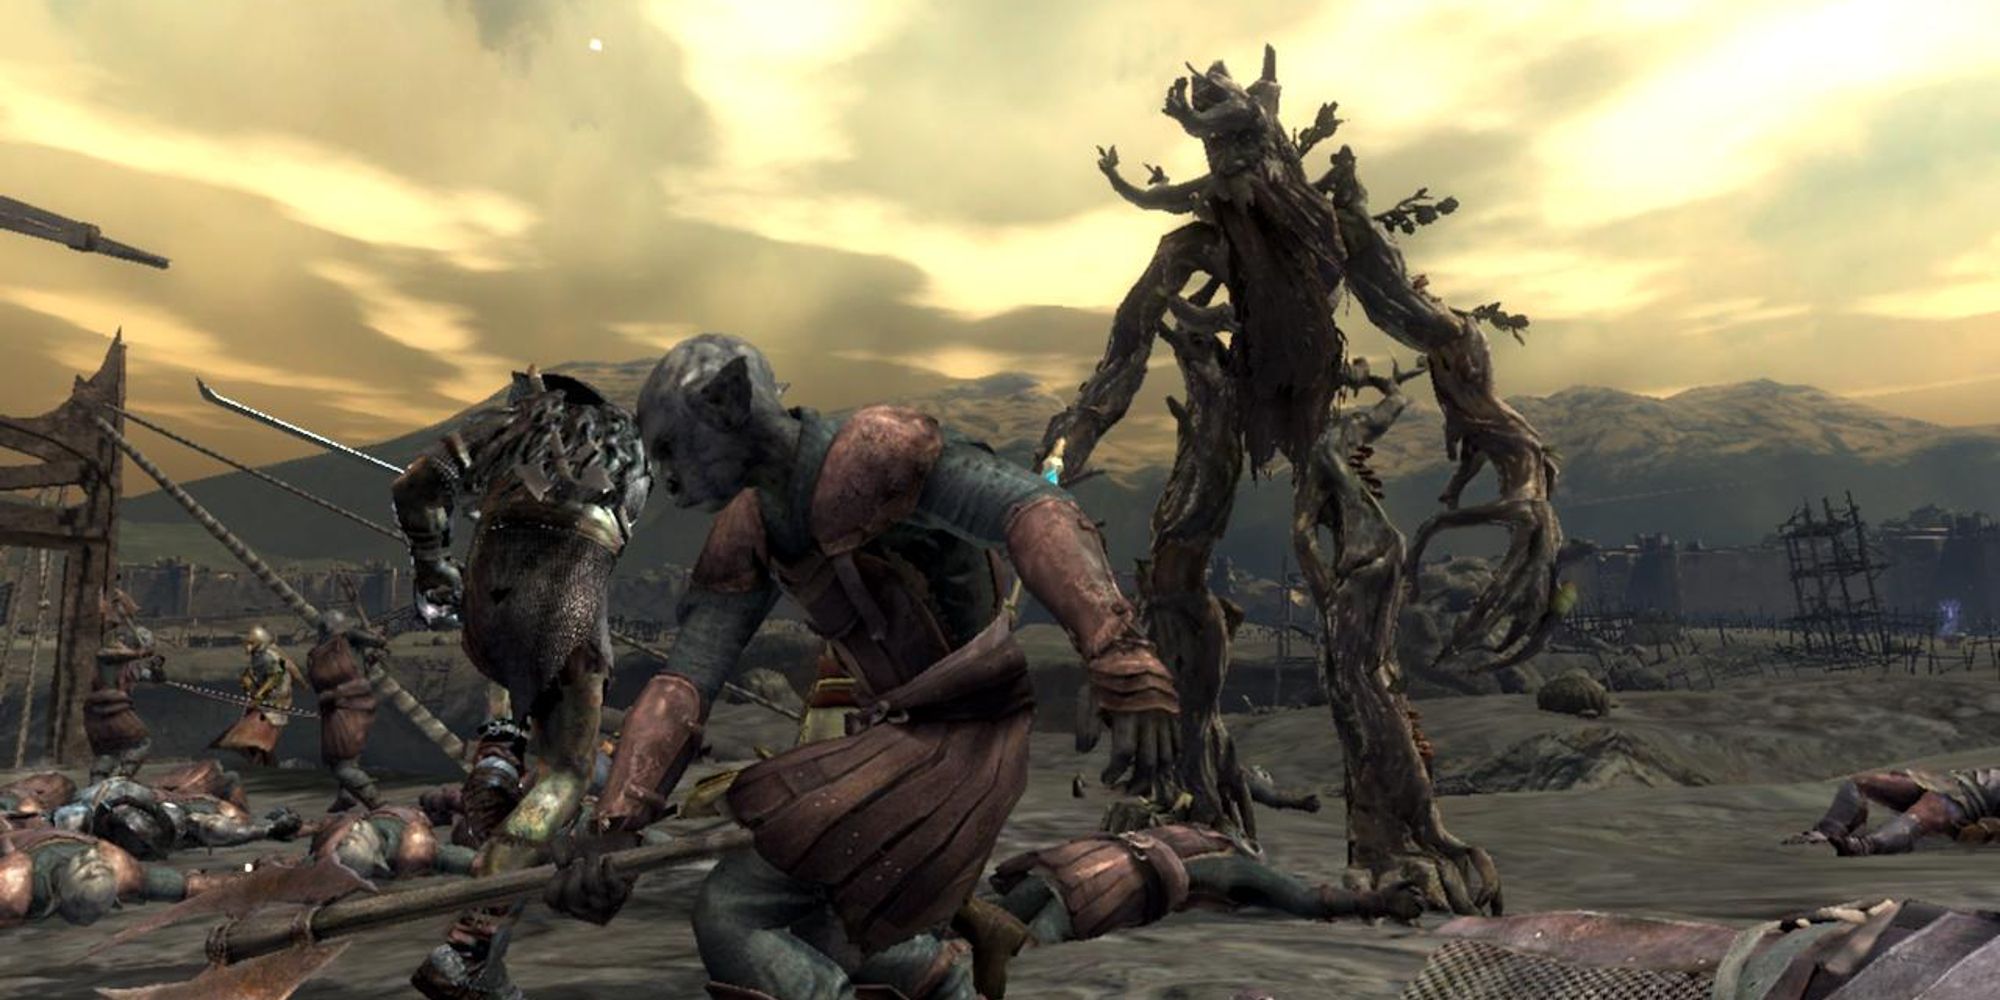 Ent fighting orcs in gameplay on The Lord Of The Rings Conquest